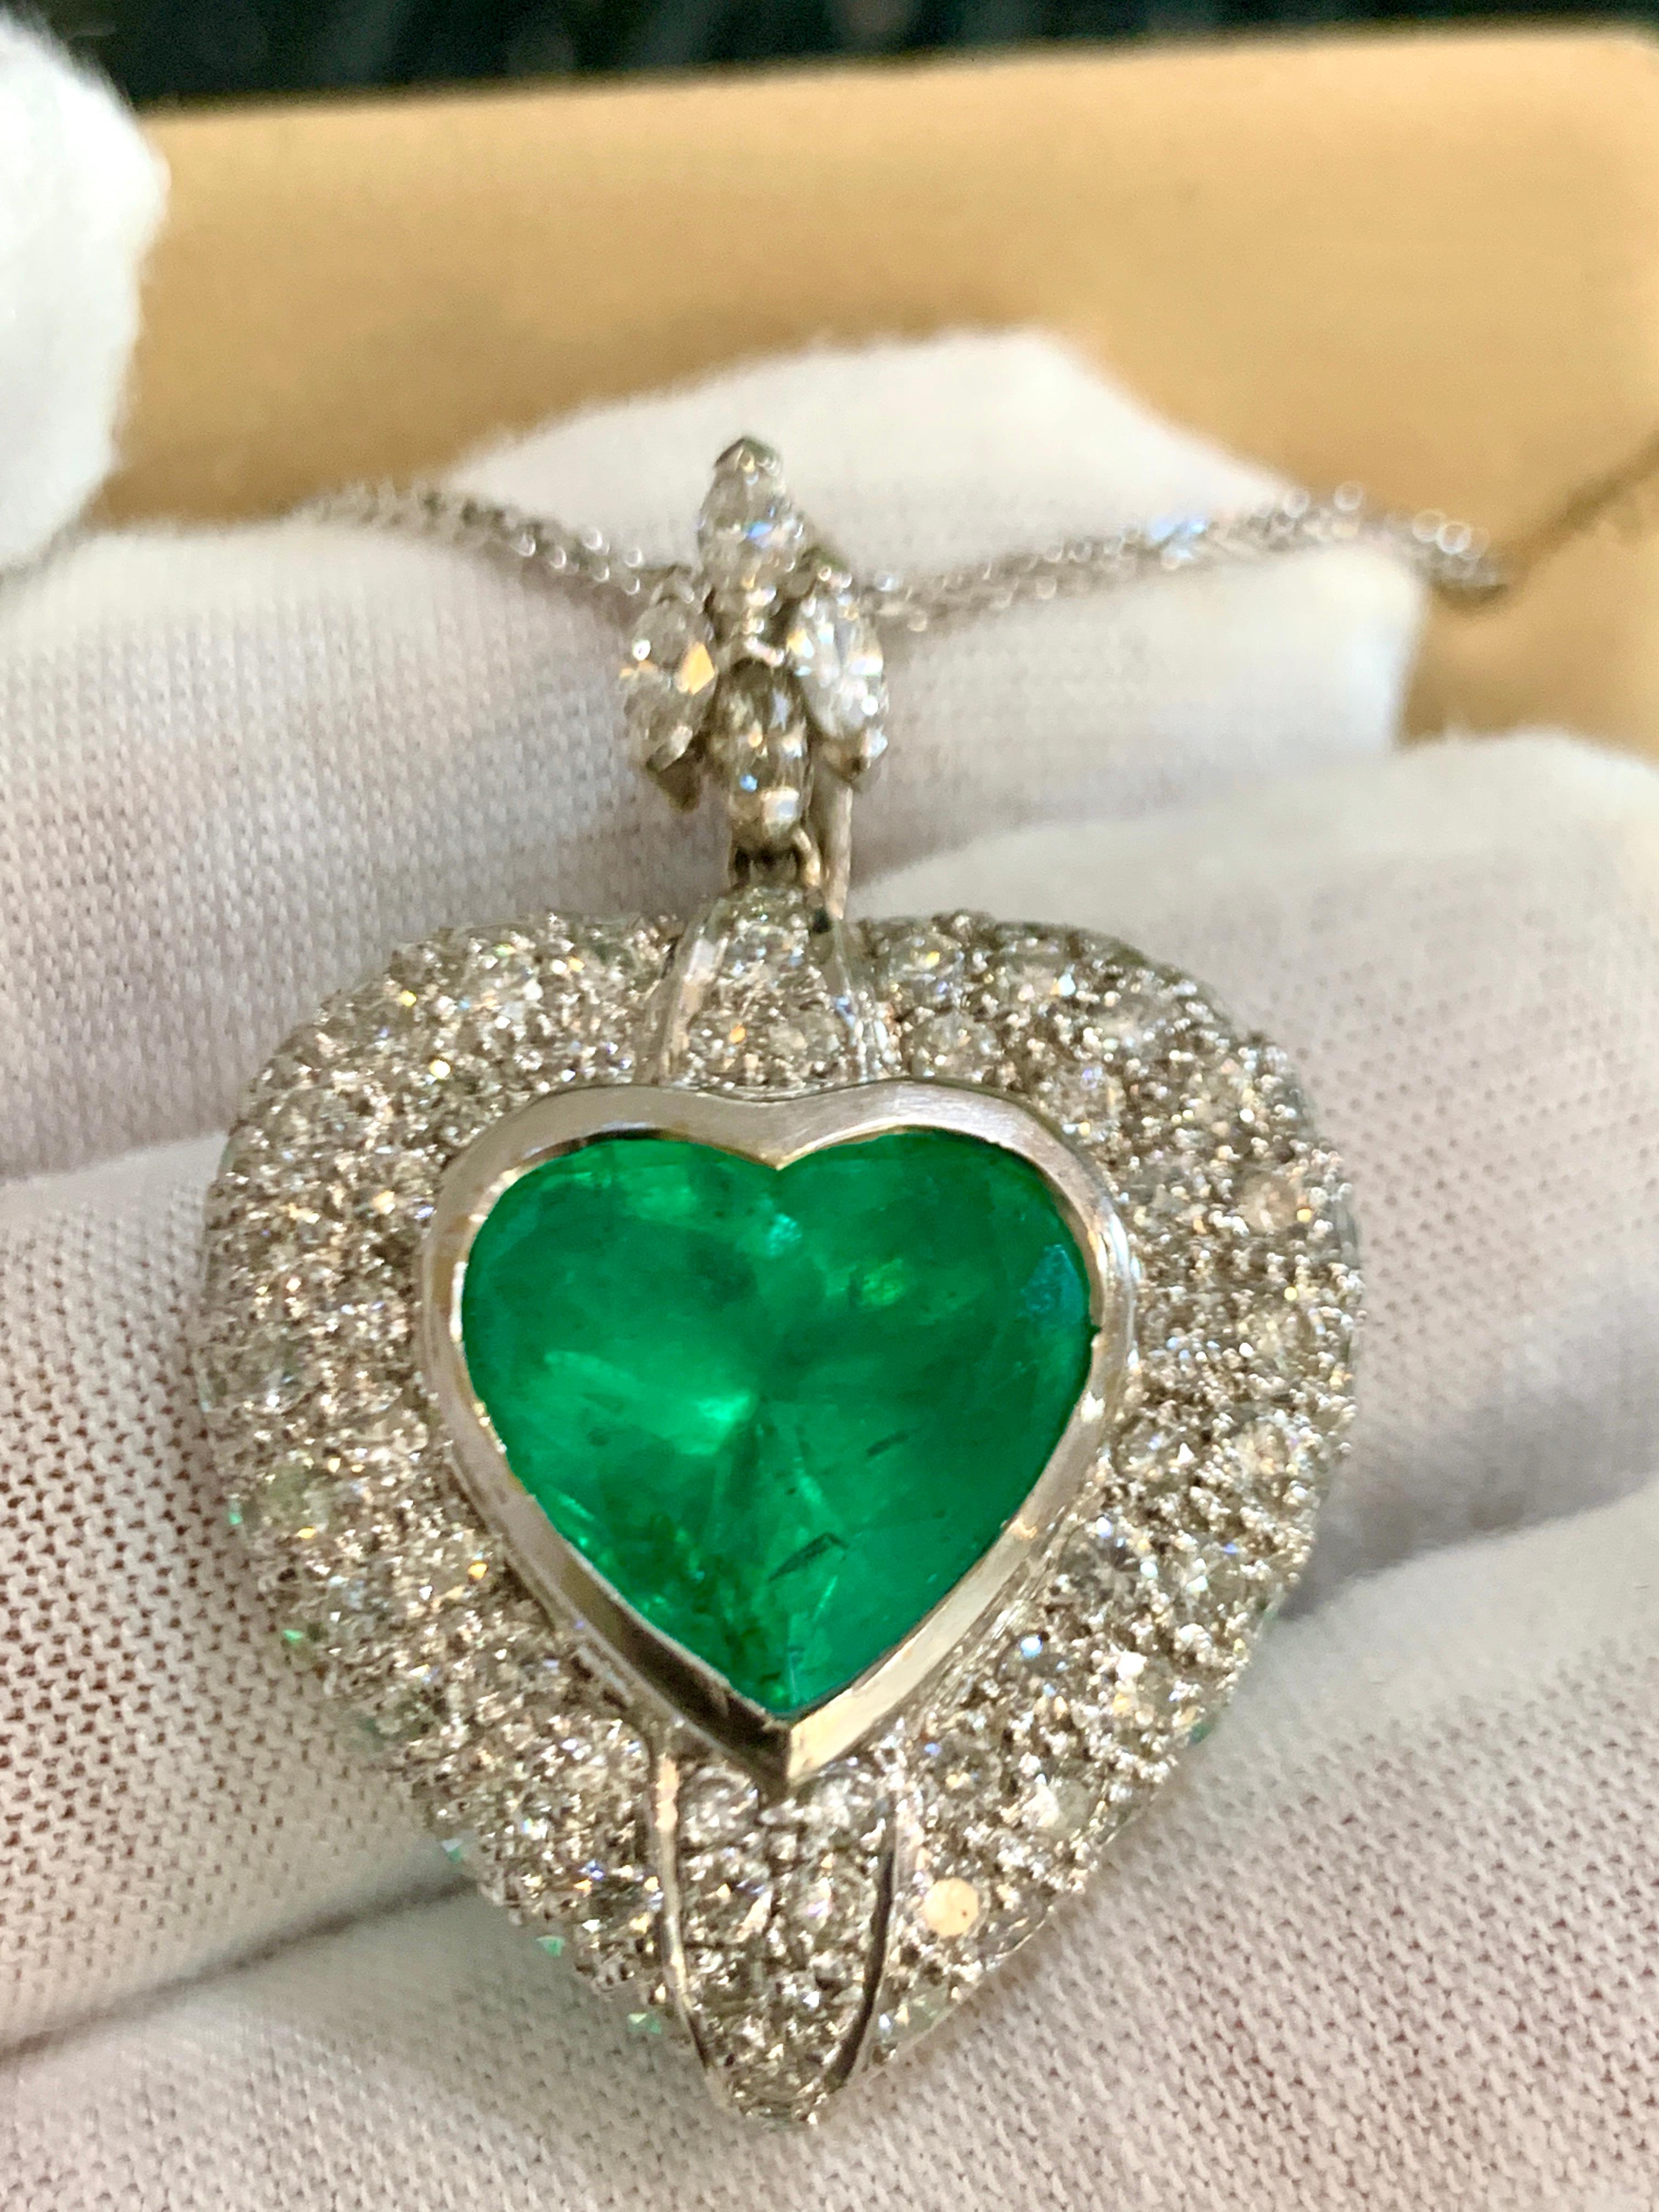 5 Carat Heart Shape Colombian Emerald and Diamond Pendant Necklace Enhancer In Excellent Condition For Sale In New York, NY